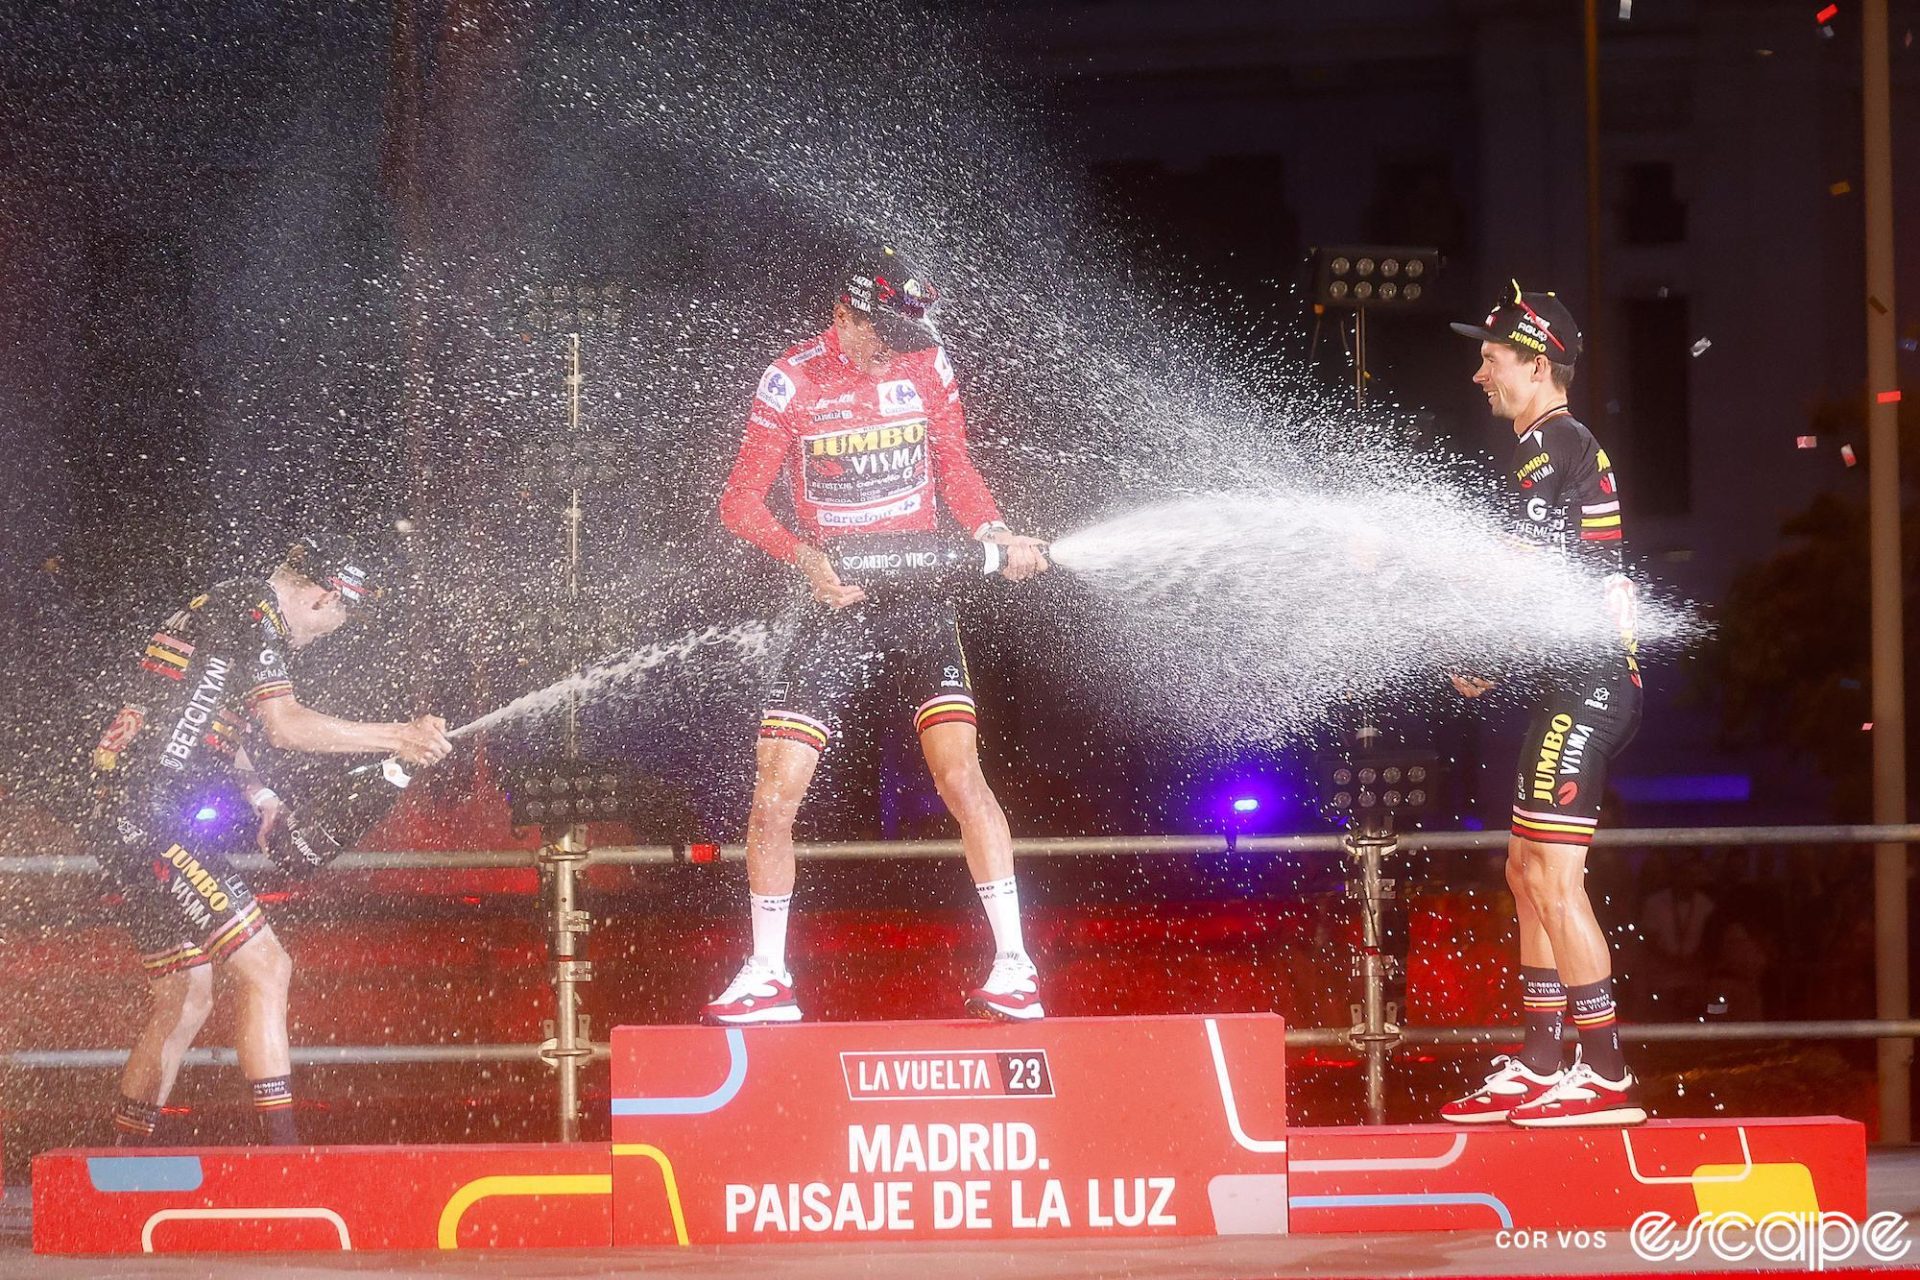 Sepp Kuss sprays champagne at teammates Primož Roglič (right) and Jonas Vingegaard (left) on the podium for the 2023 Vuelta a España. All three riders have champagne bottles and are dousing each other, which Richard Plugge approves of as long as they don't drink it.